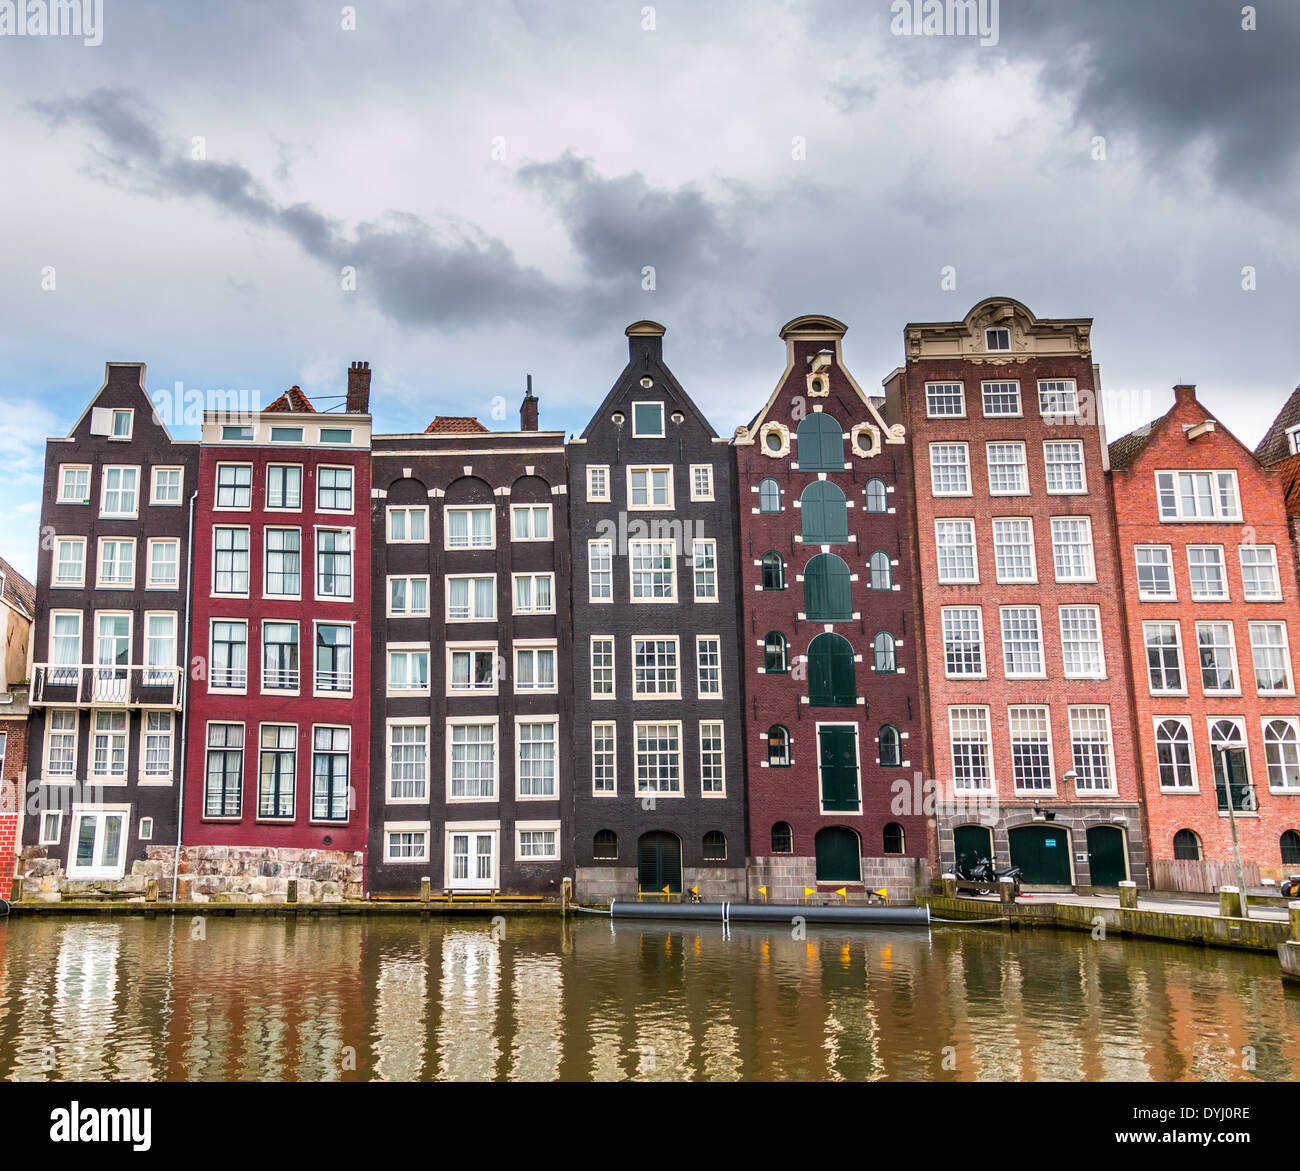 16  to 17 century homes along canals in Amsterdam , Holland Stock Photo